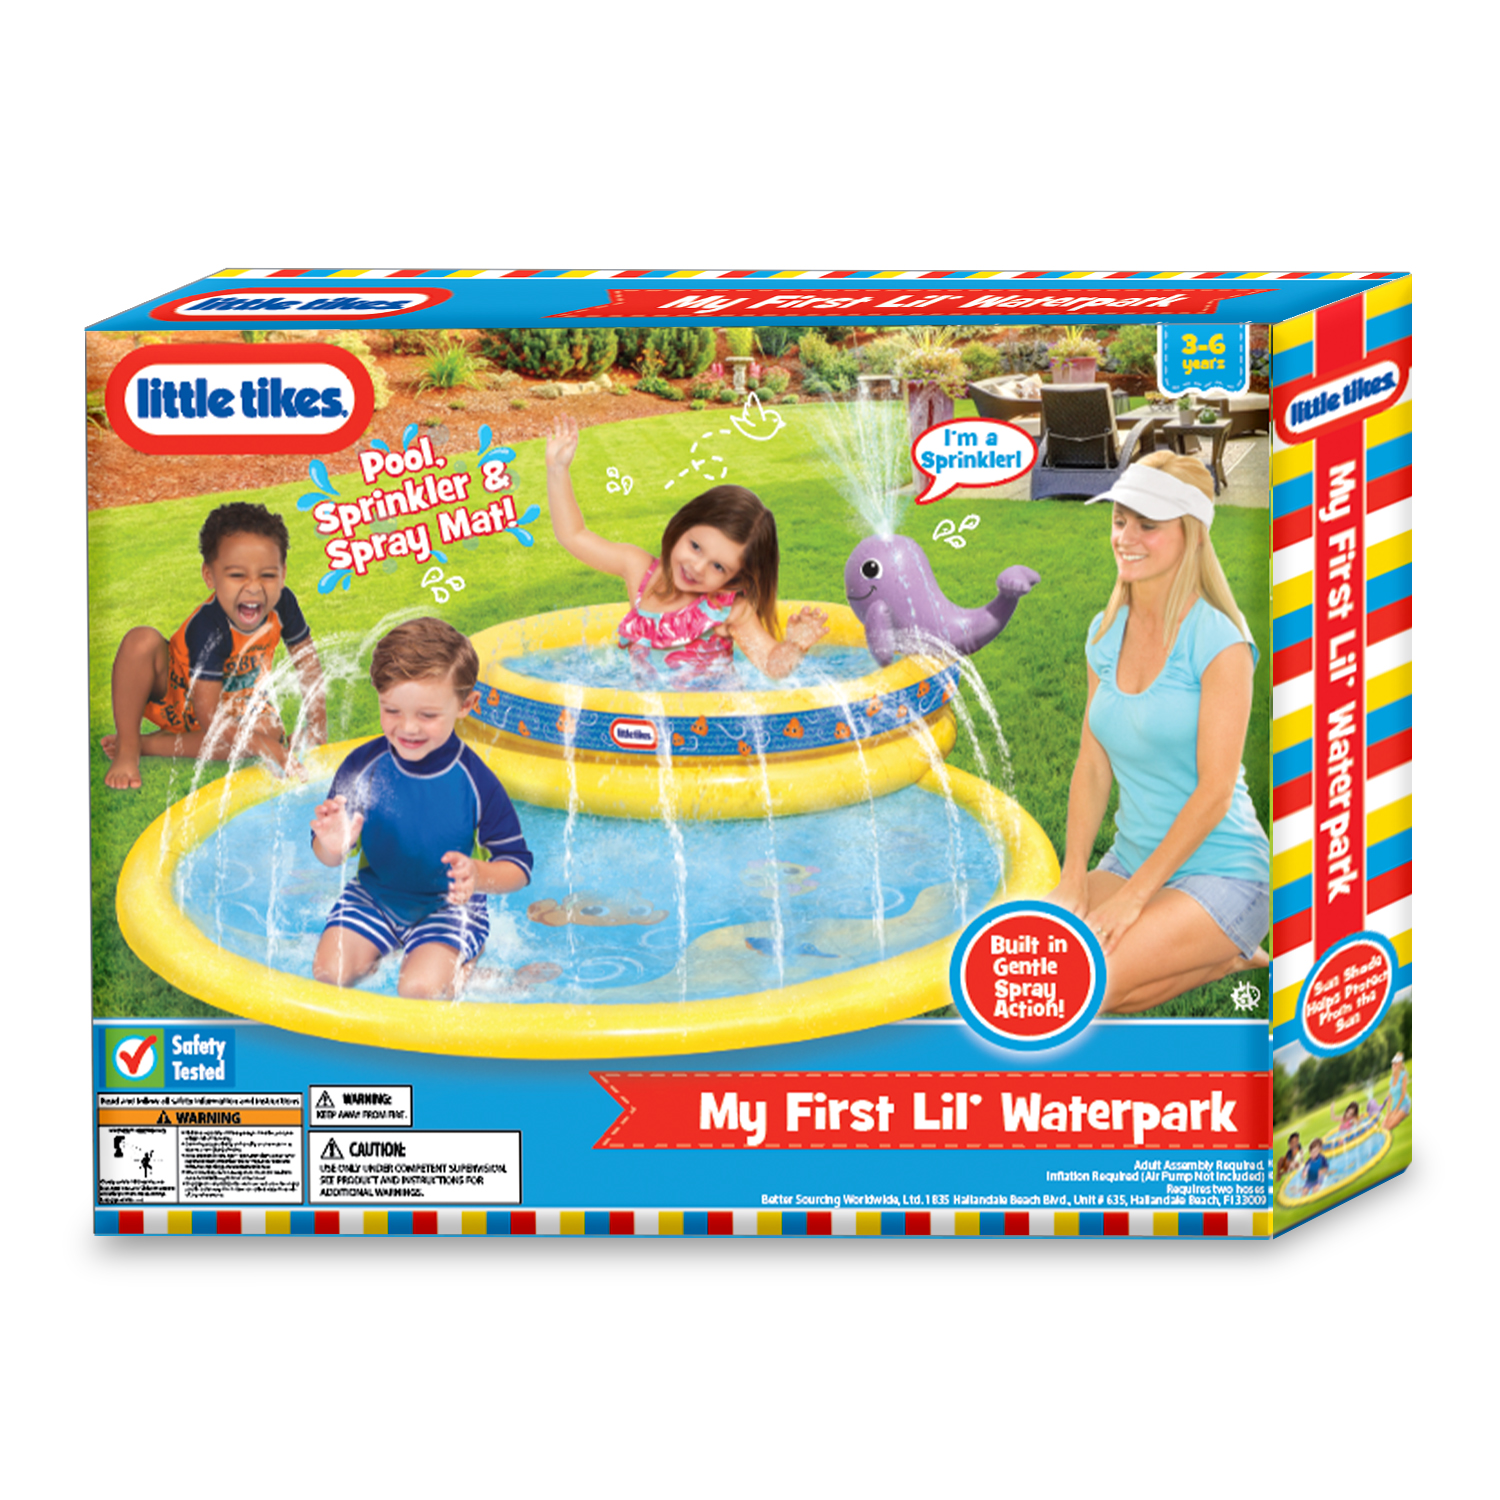 Little Tikes My First Lil Water Park, Round Splash Pool with Whale Sprinkler and Spray Mat for Kids Ages 3-6 - image 2 of 5